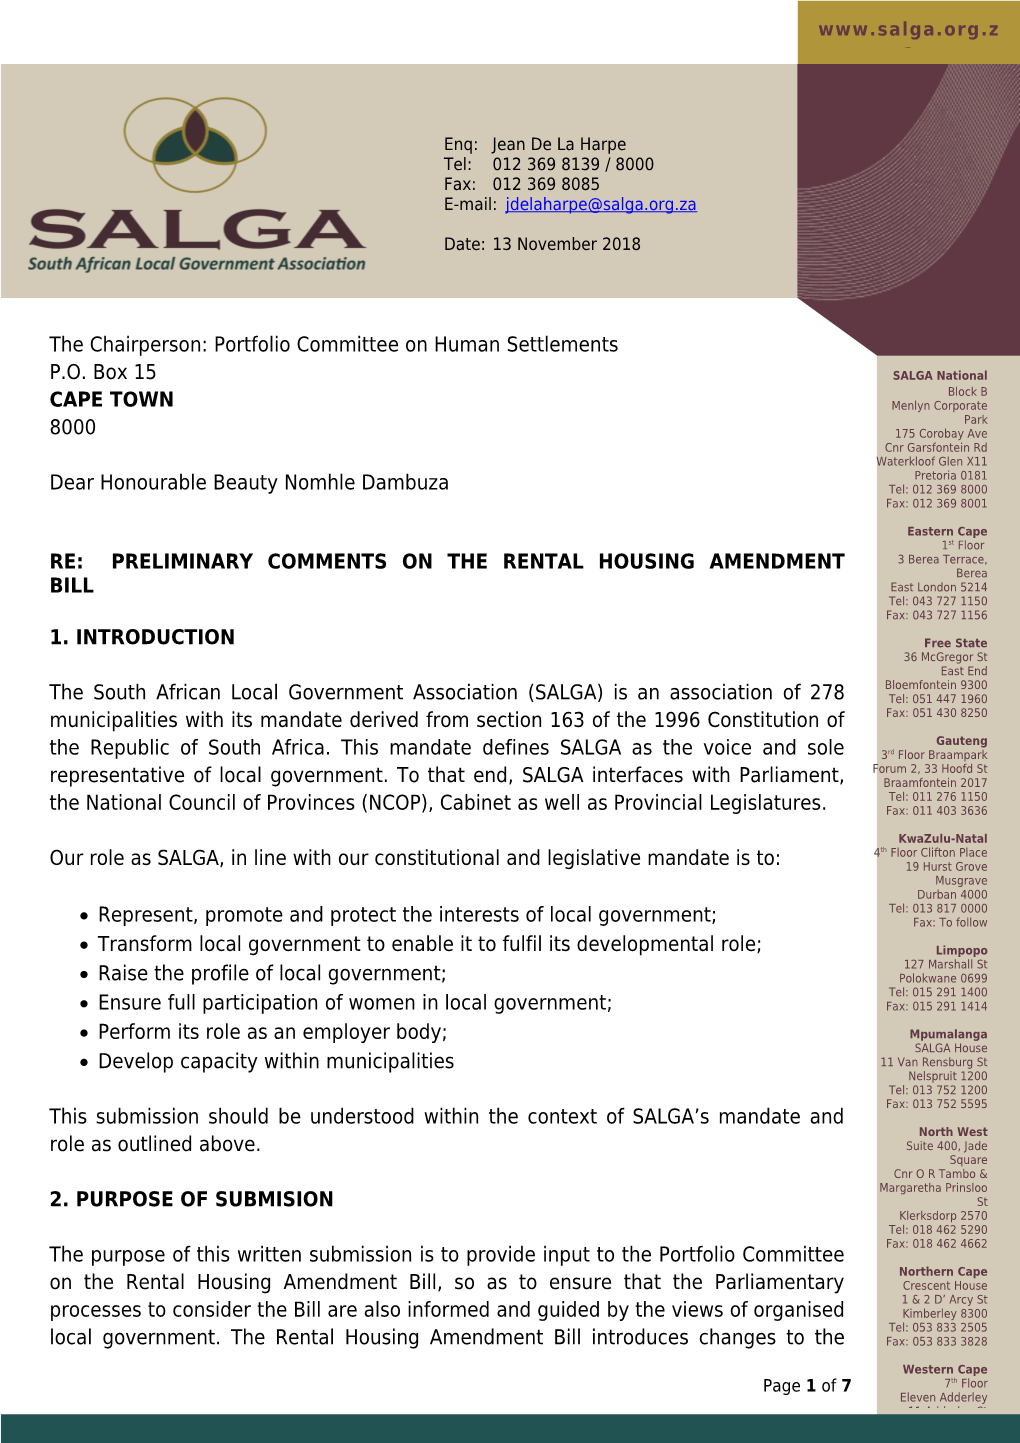 The Chairperson: Portfolio Committee on Human Settlements